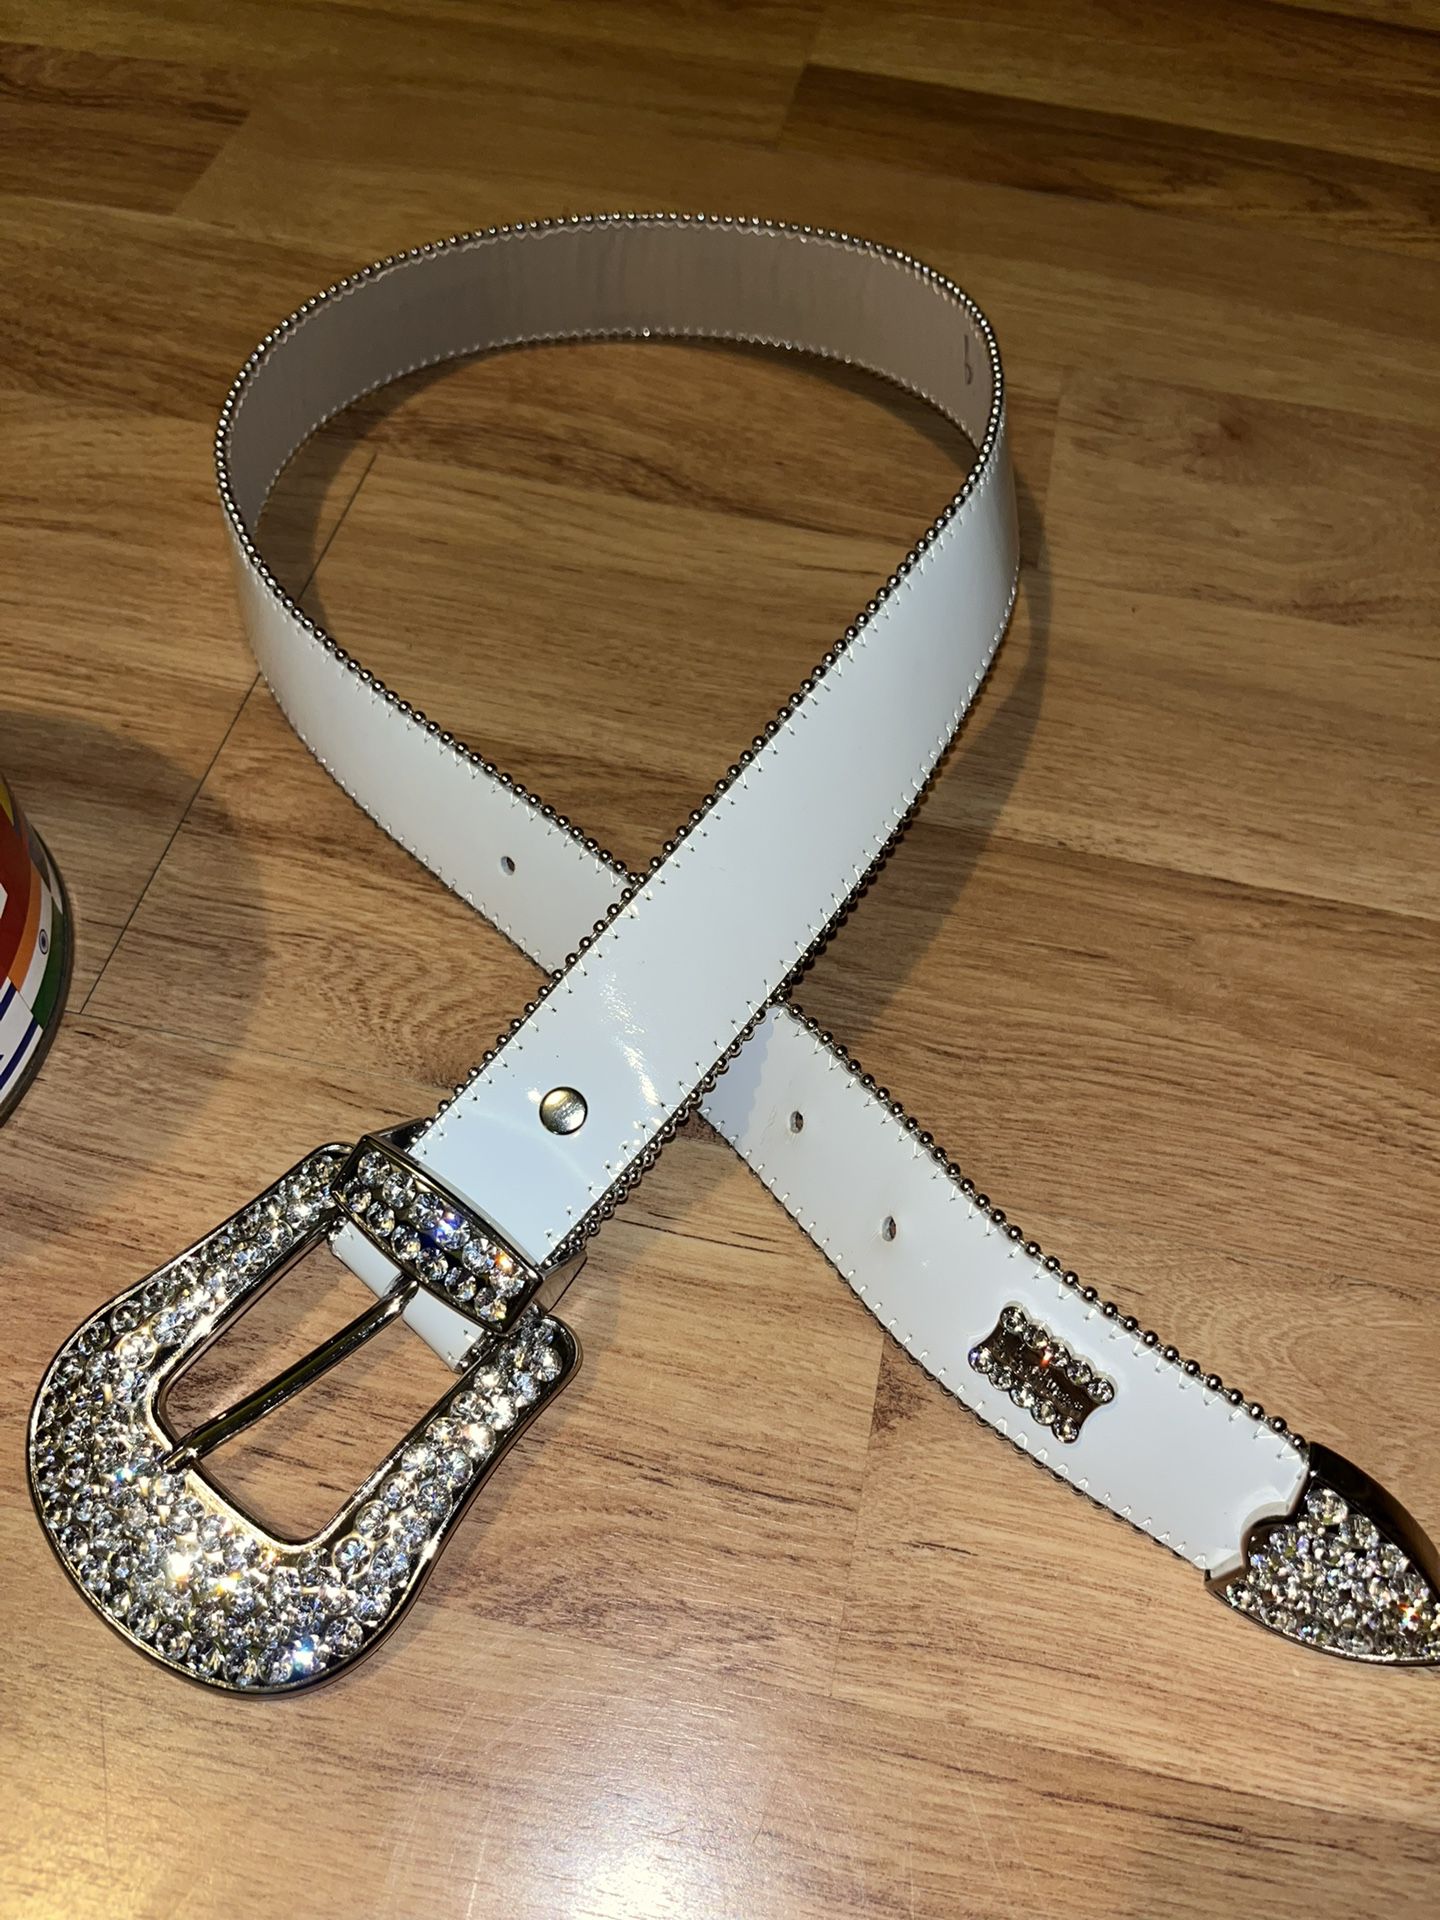 B.B Simon Belt for Sale in Milford, CT - OfferUp